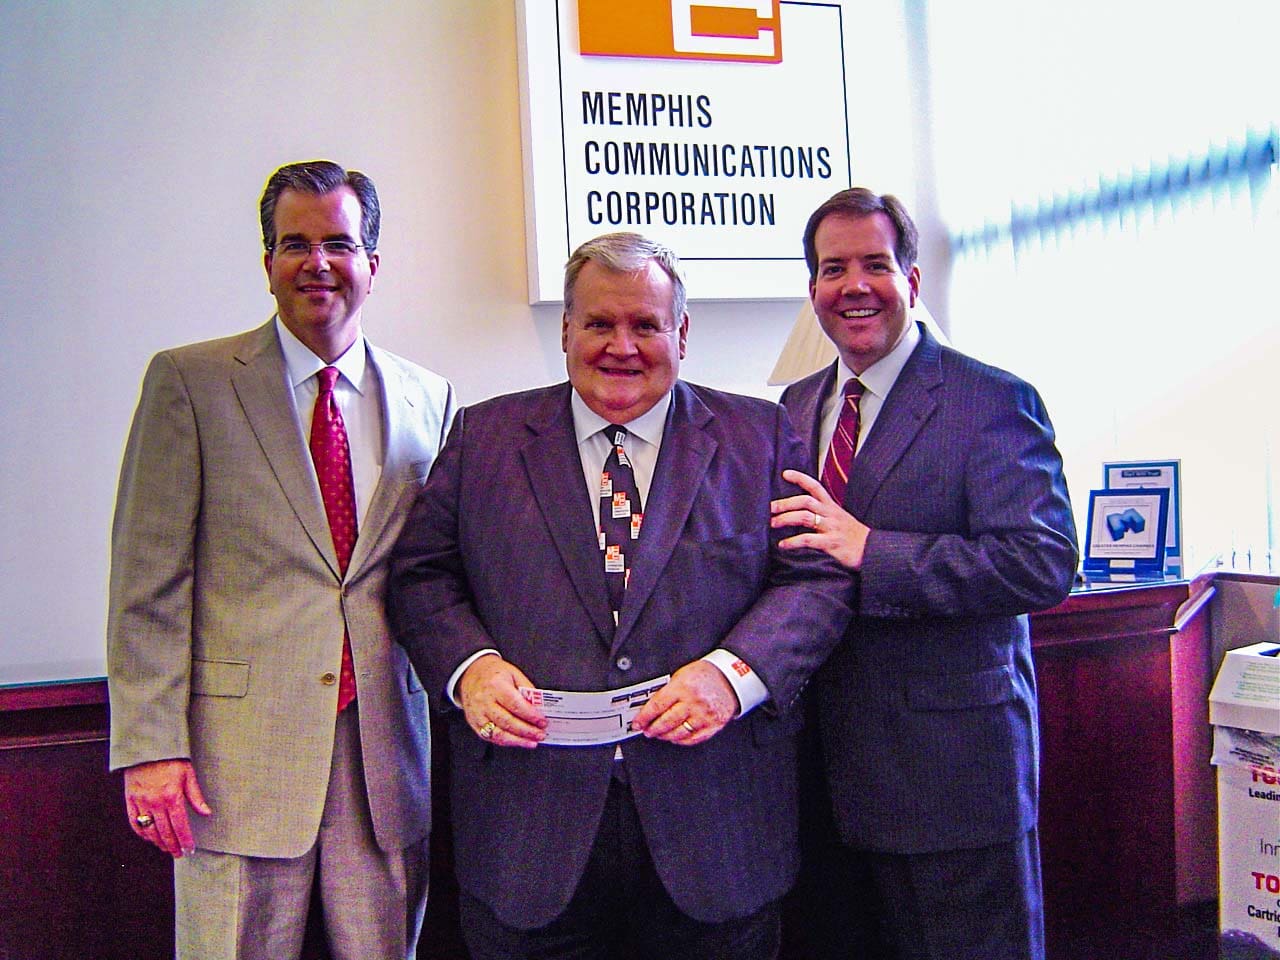 Scot Berry (left) and Shane Berry (right) present Dean Berry (middle) with the first check for the purchase of Memphis Communications Corporation (MCC).